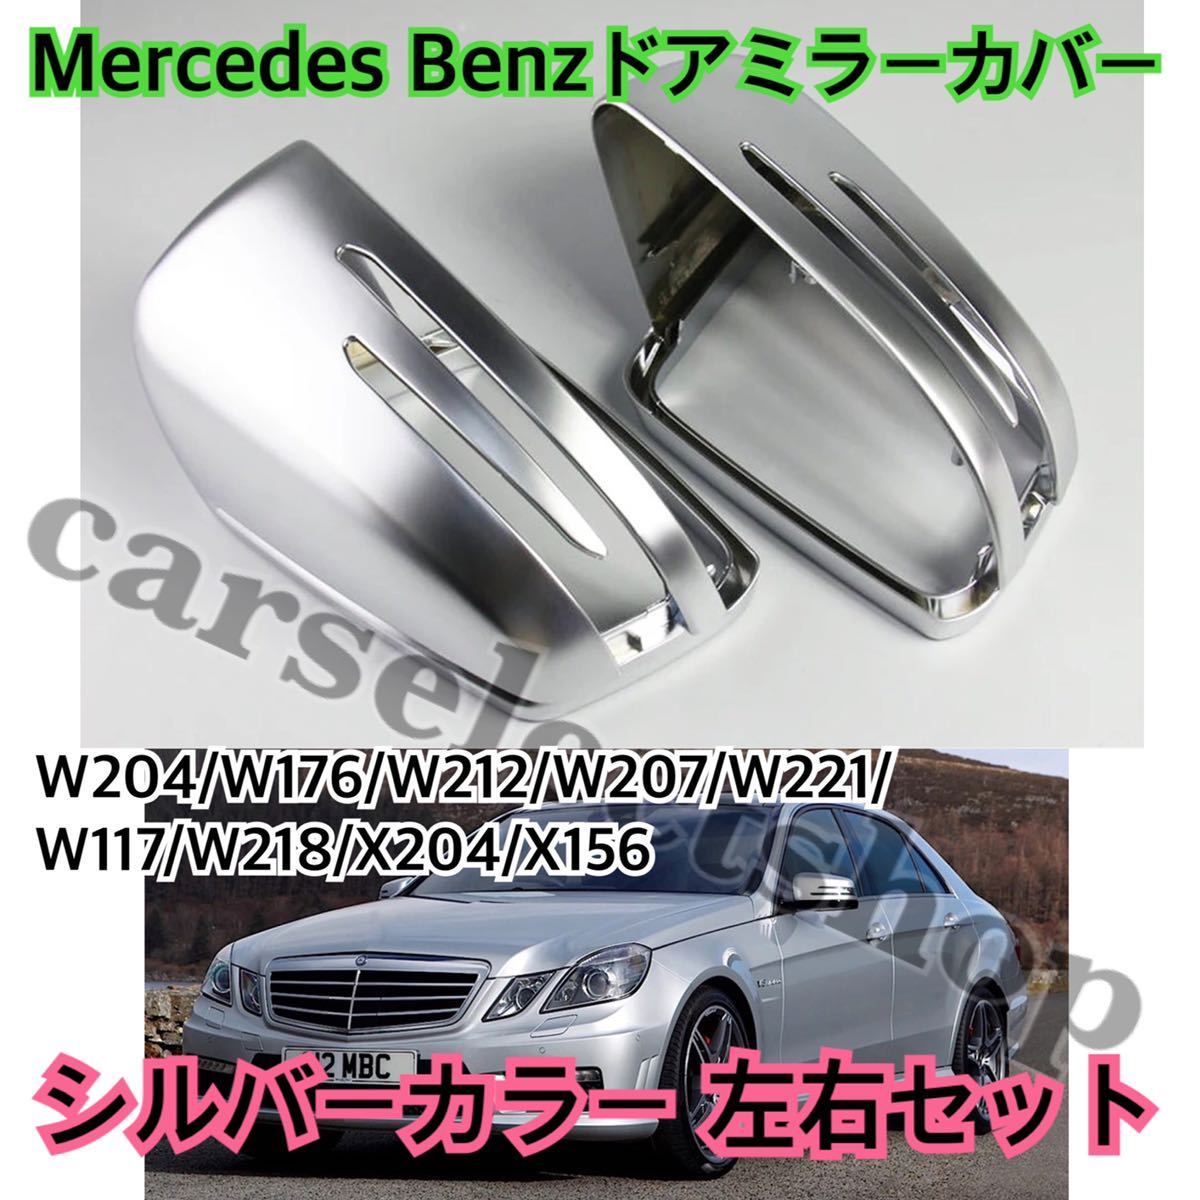  postage included * Benz door mirror cover silver color original exchange type W204/W176/W212/ W207/W221/W117/W218/X204/X156 left right set exchange type 